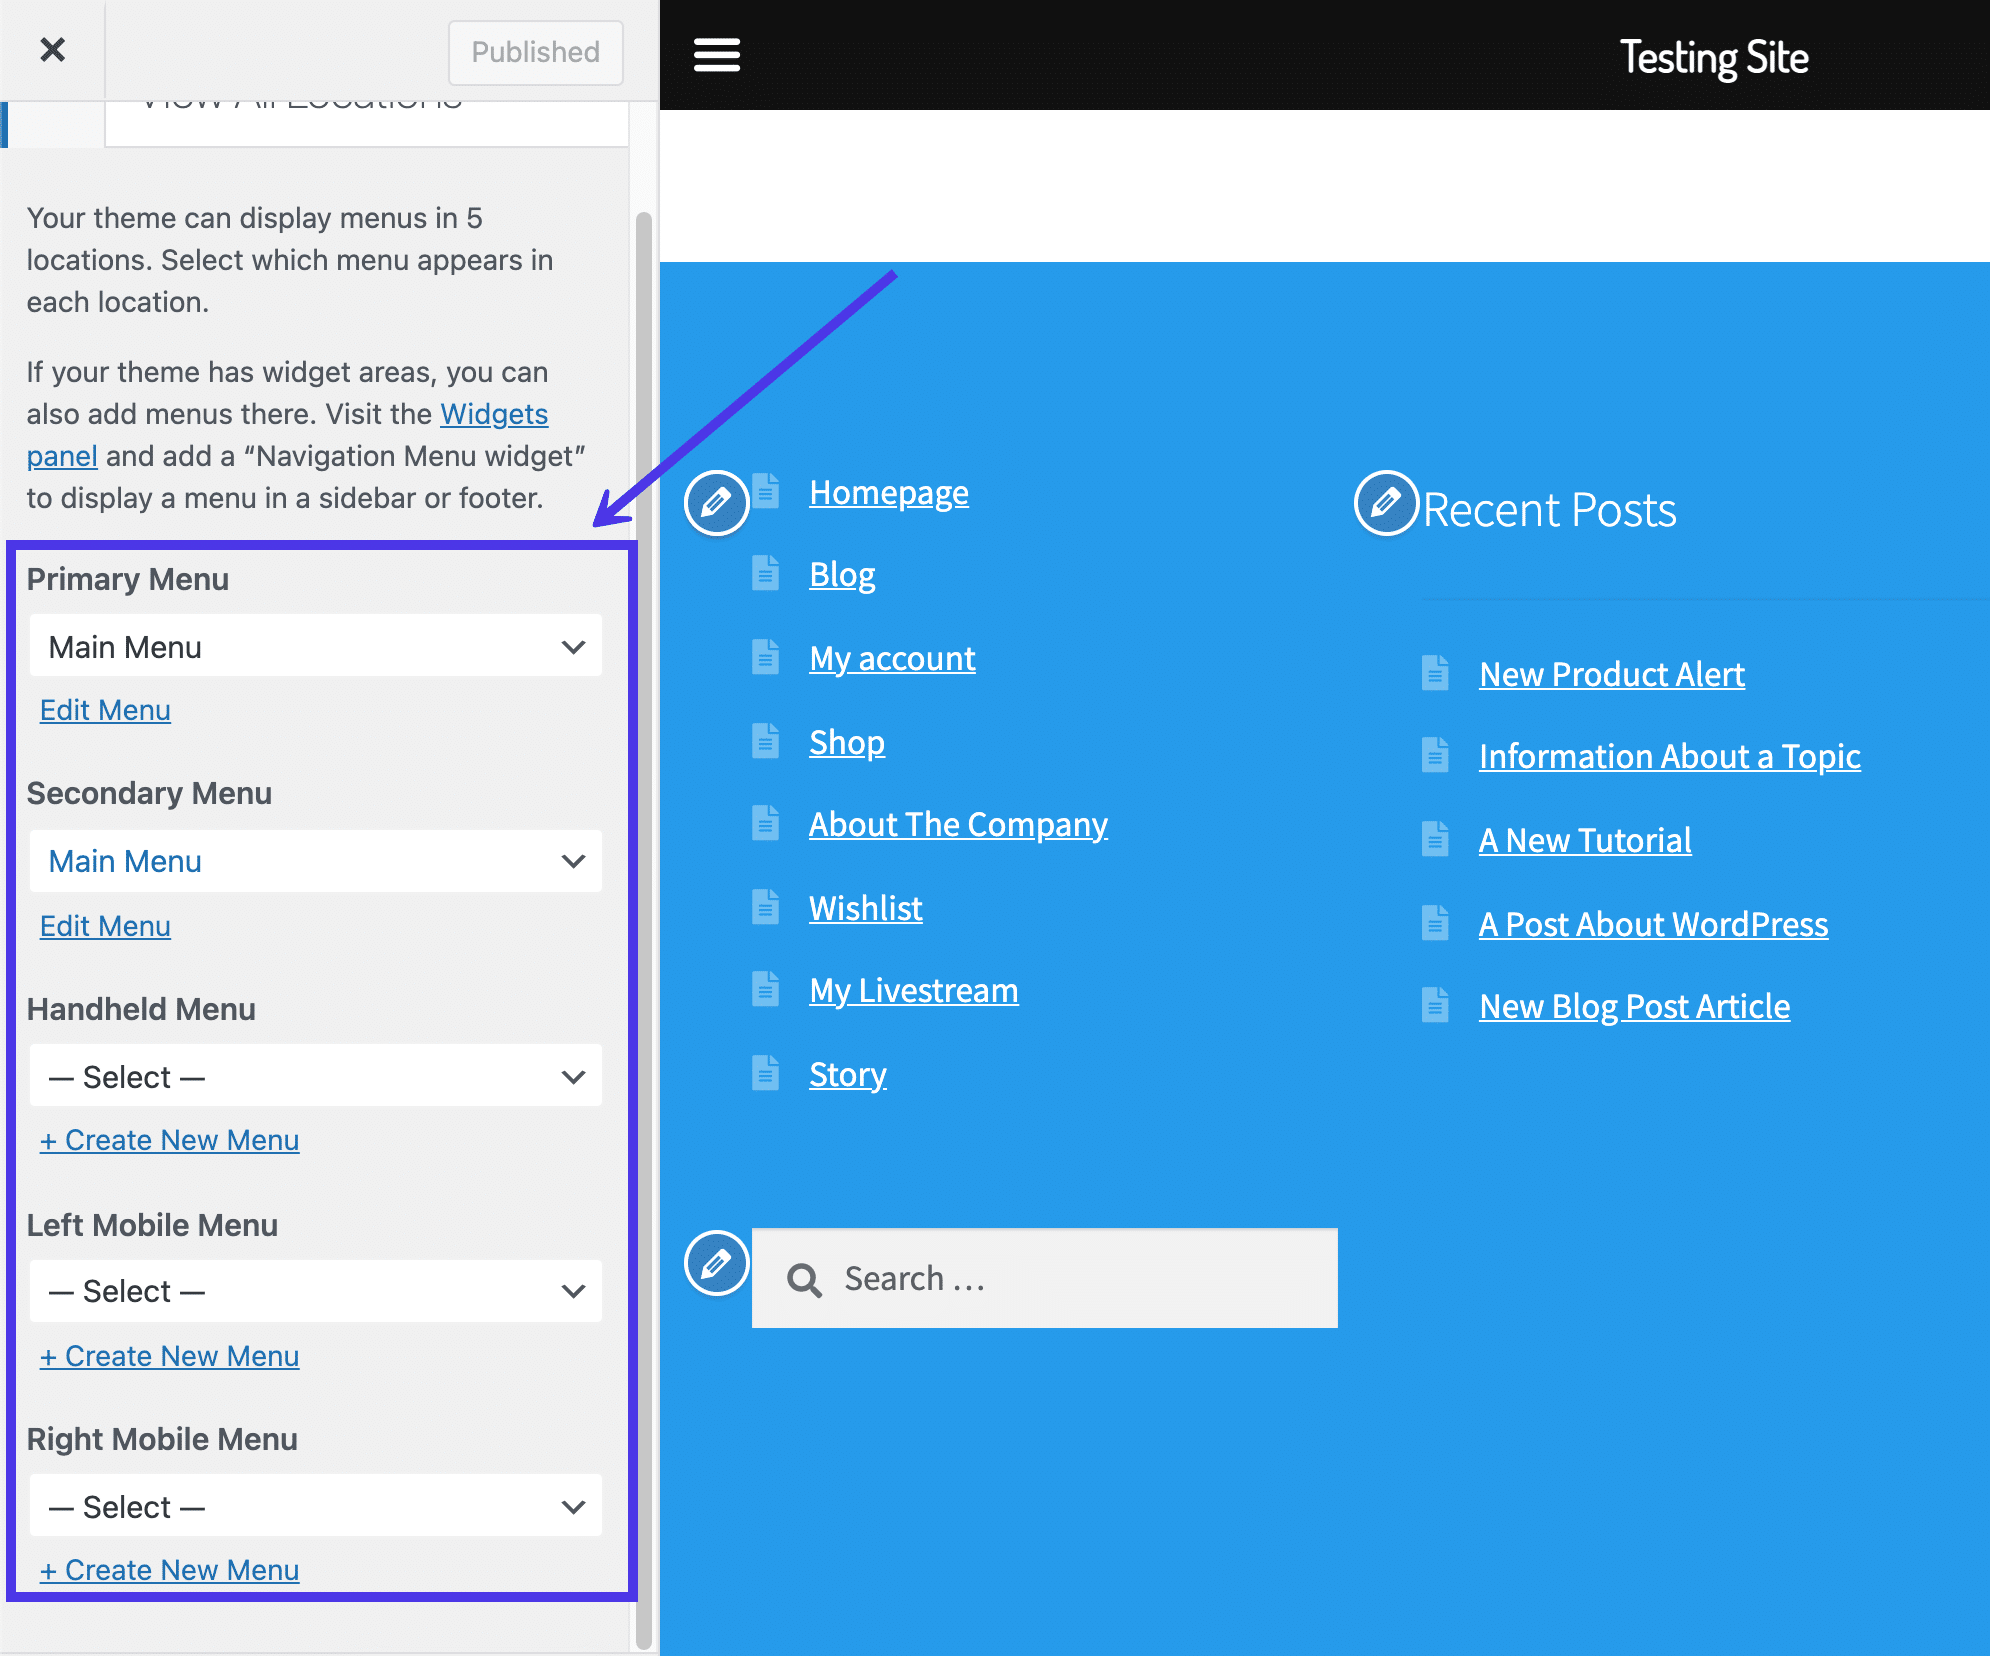 Some themes don't have spots to put menus in footers.